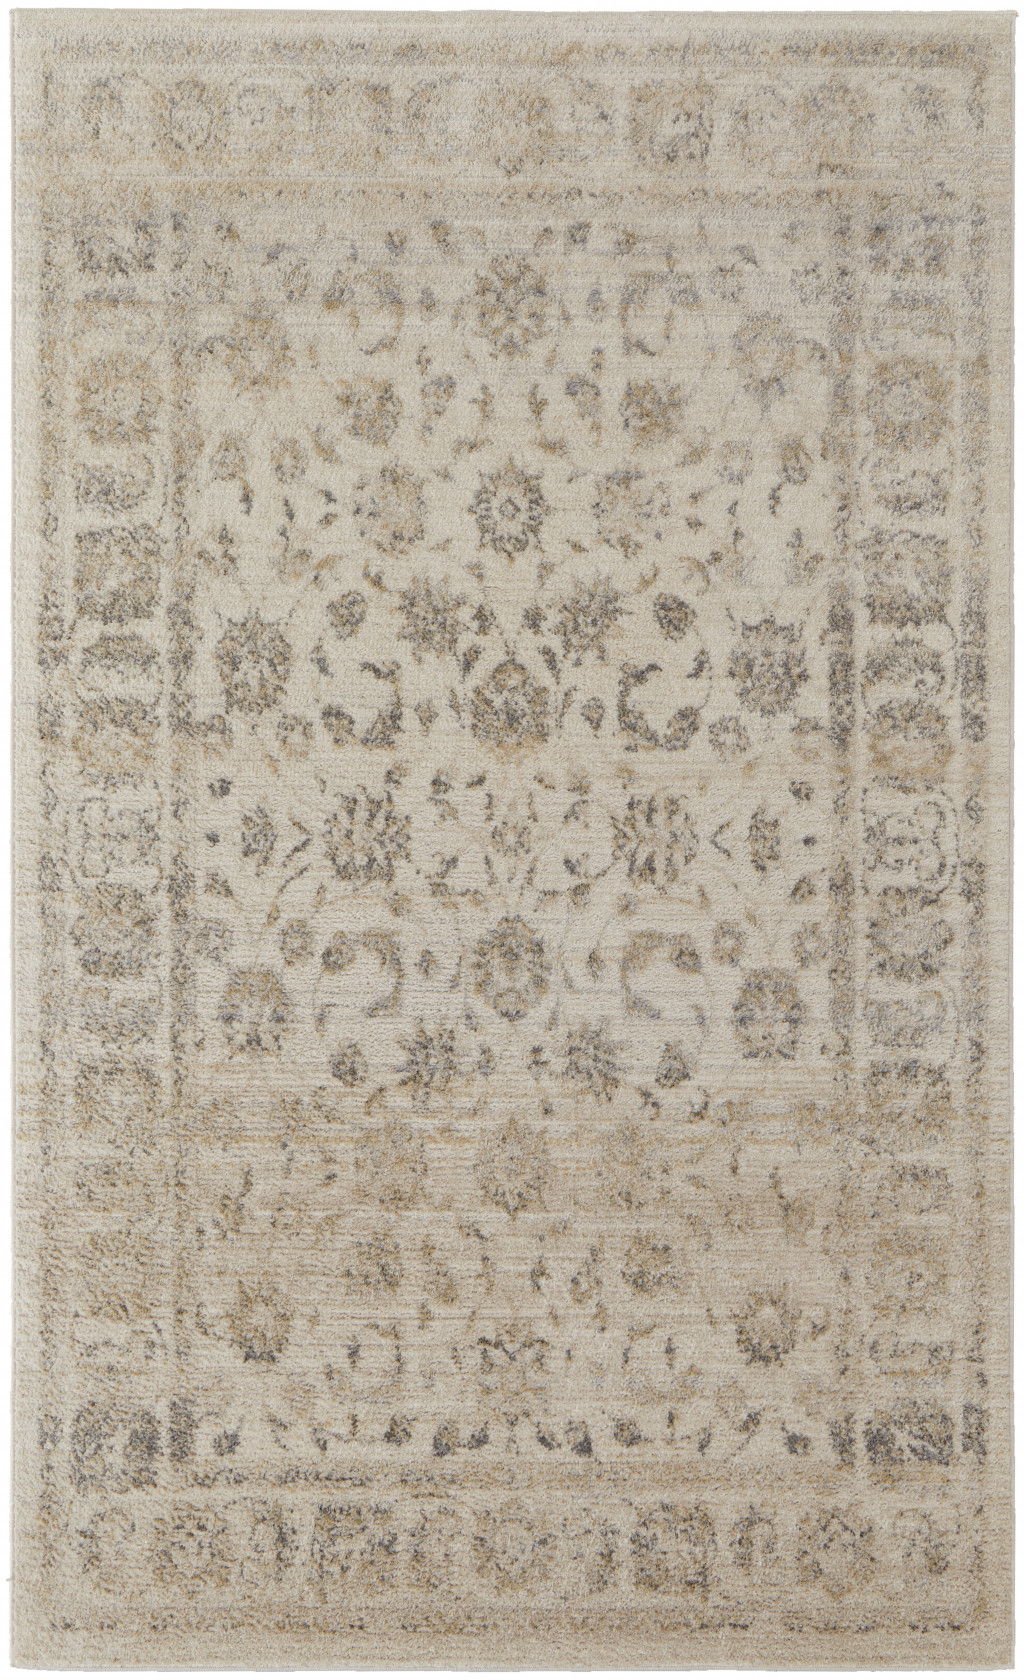 Abstract Power Loom Distressed Area Rug - Ivory Beige And Gray - 7' X 10'